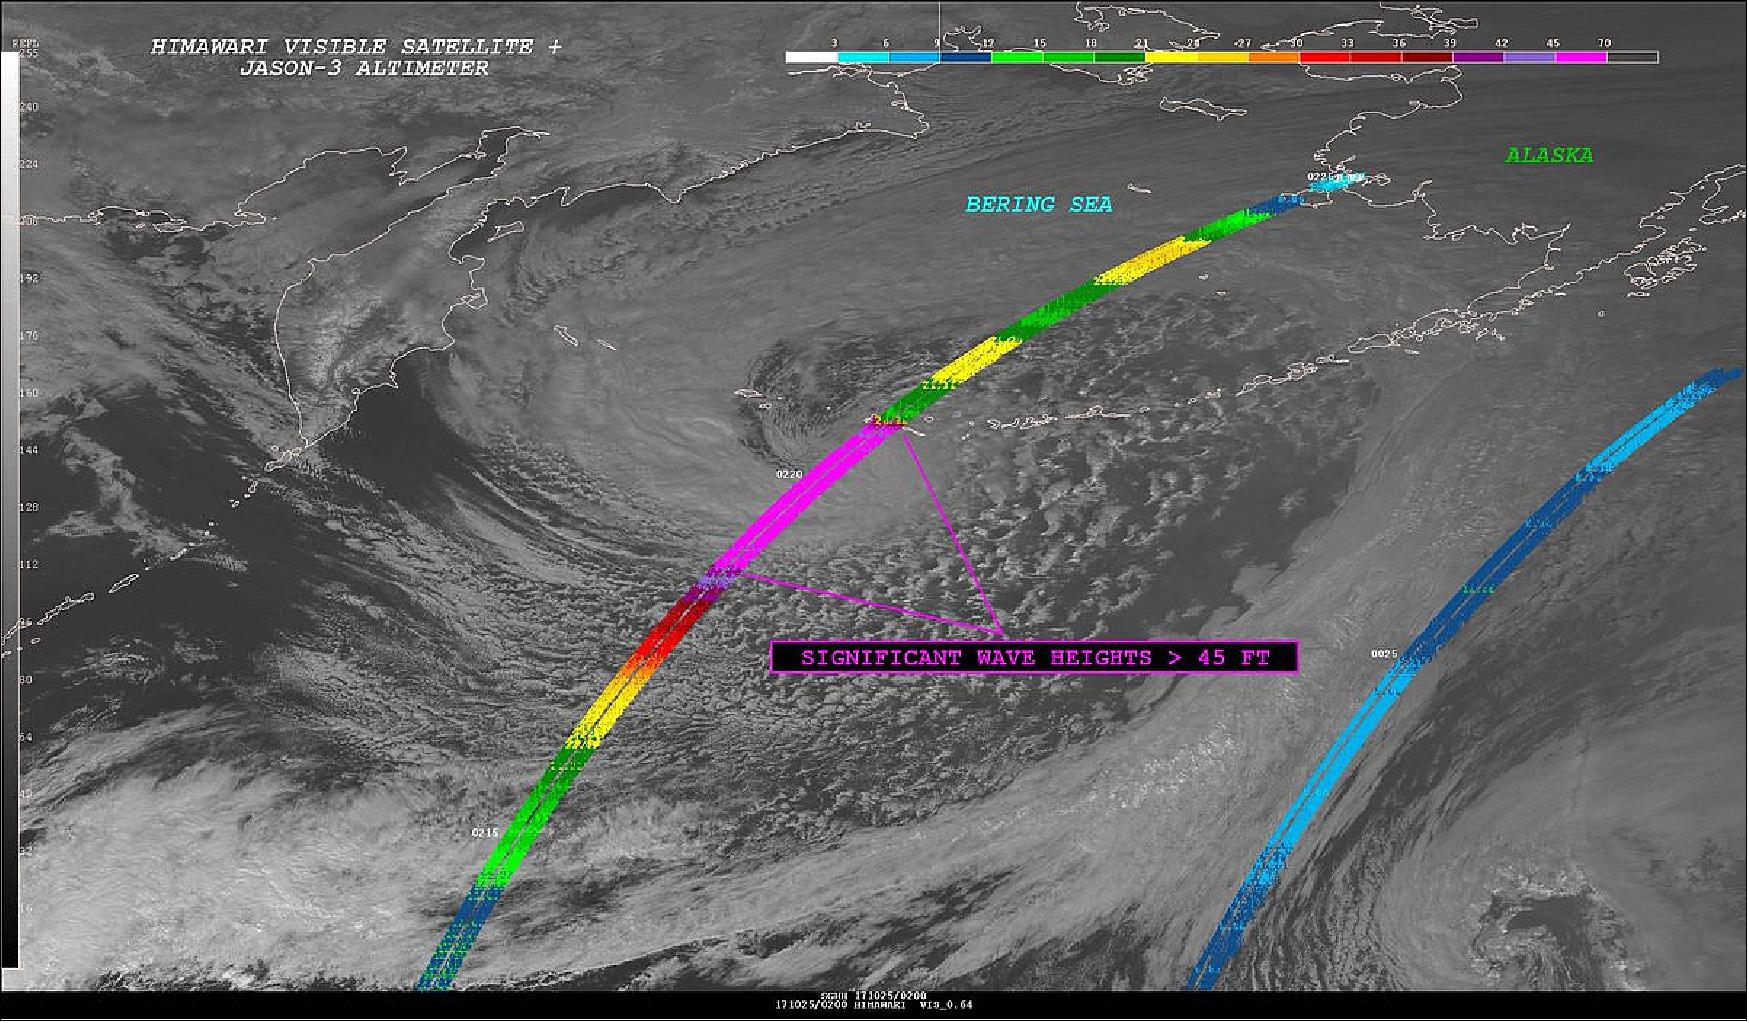 Figure 11: Jason-3 detected phenomenal significant wave heights to 17.6 meters (58 feet) just south of the Aleutians during a storm in October 2017 (image credit: NOAA National Weather Service Ocean Prediction Center)